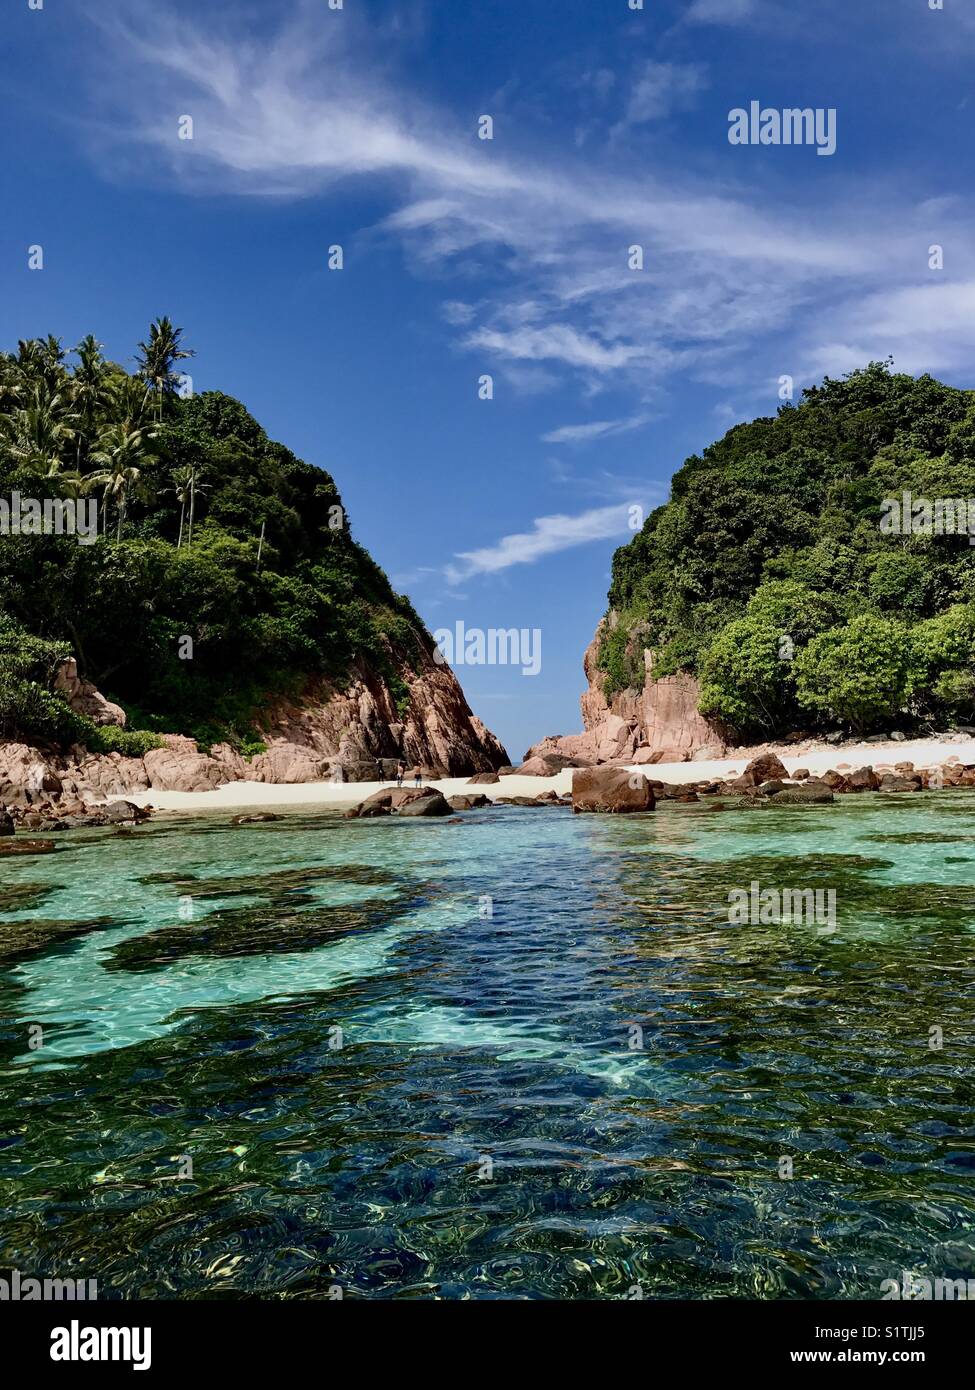 Clear water at Redang Island, Terengganu Malaysia. A snorkelling spot filled with sea creatures and beautiful fishes. Stock Photo